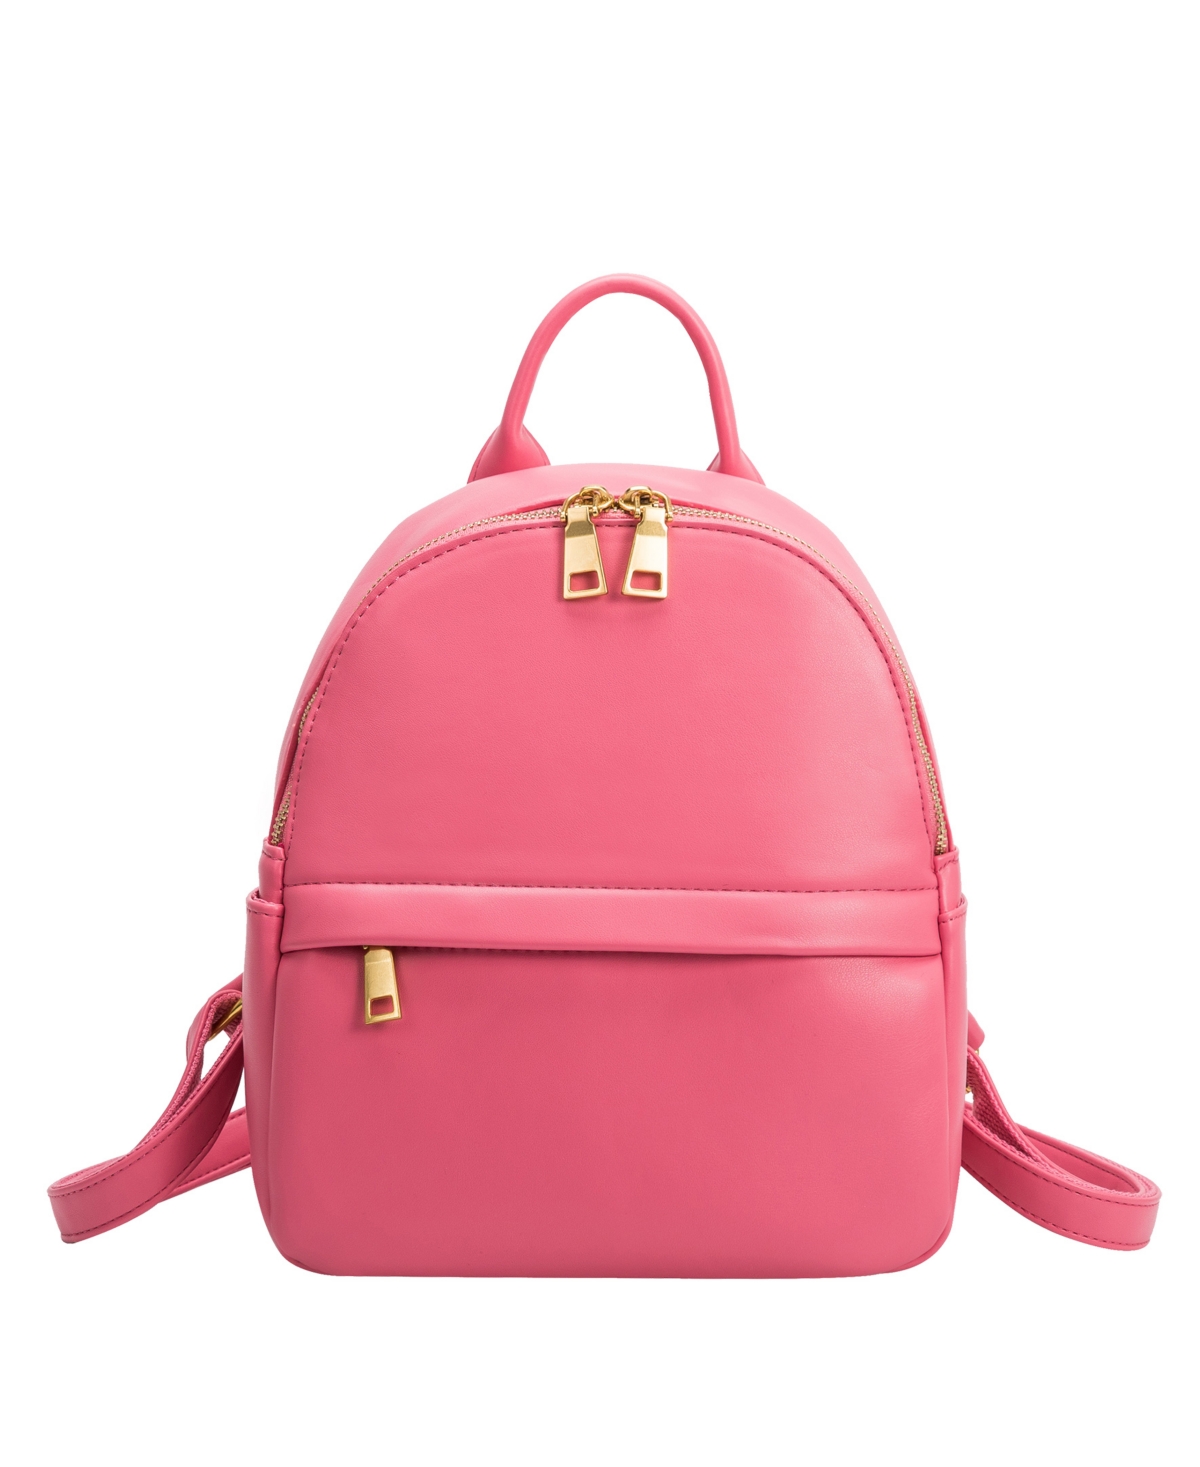 MELIE BIANCO WOMEN'S LOUISE SMALL BACKPACK